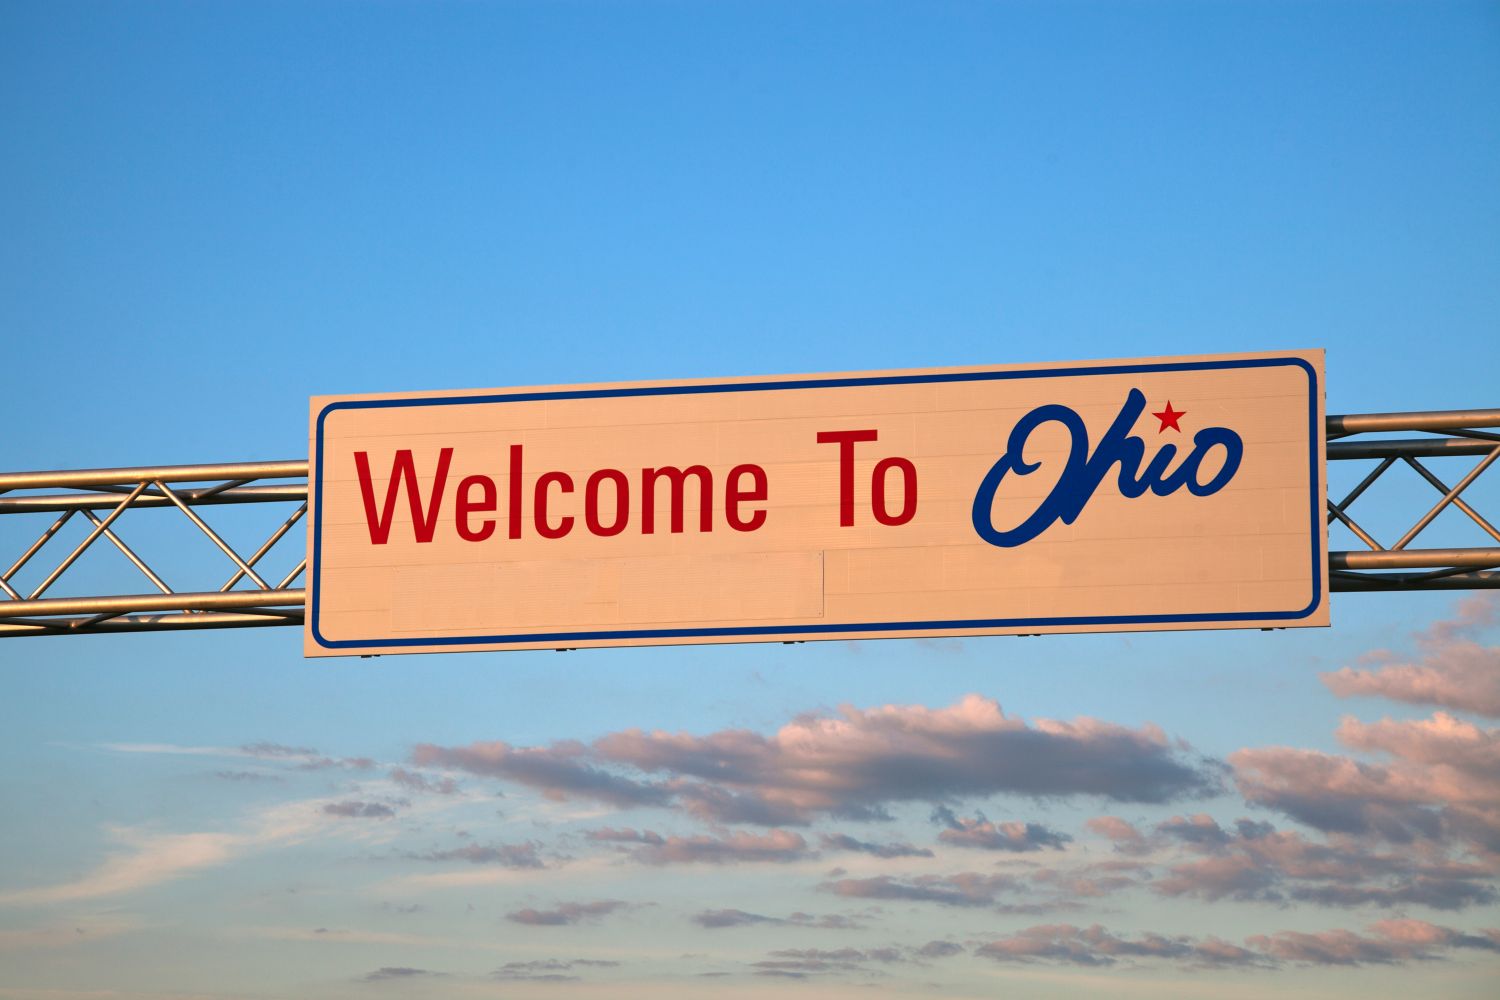 Road sign saying Welcome to Ohio